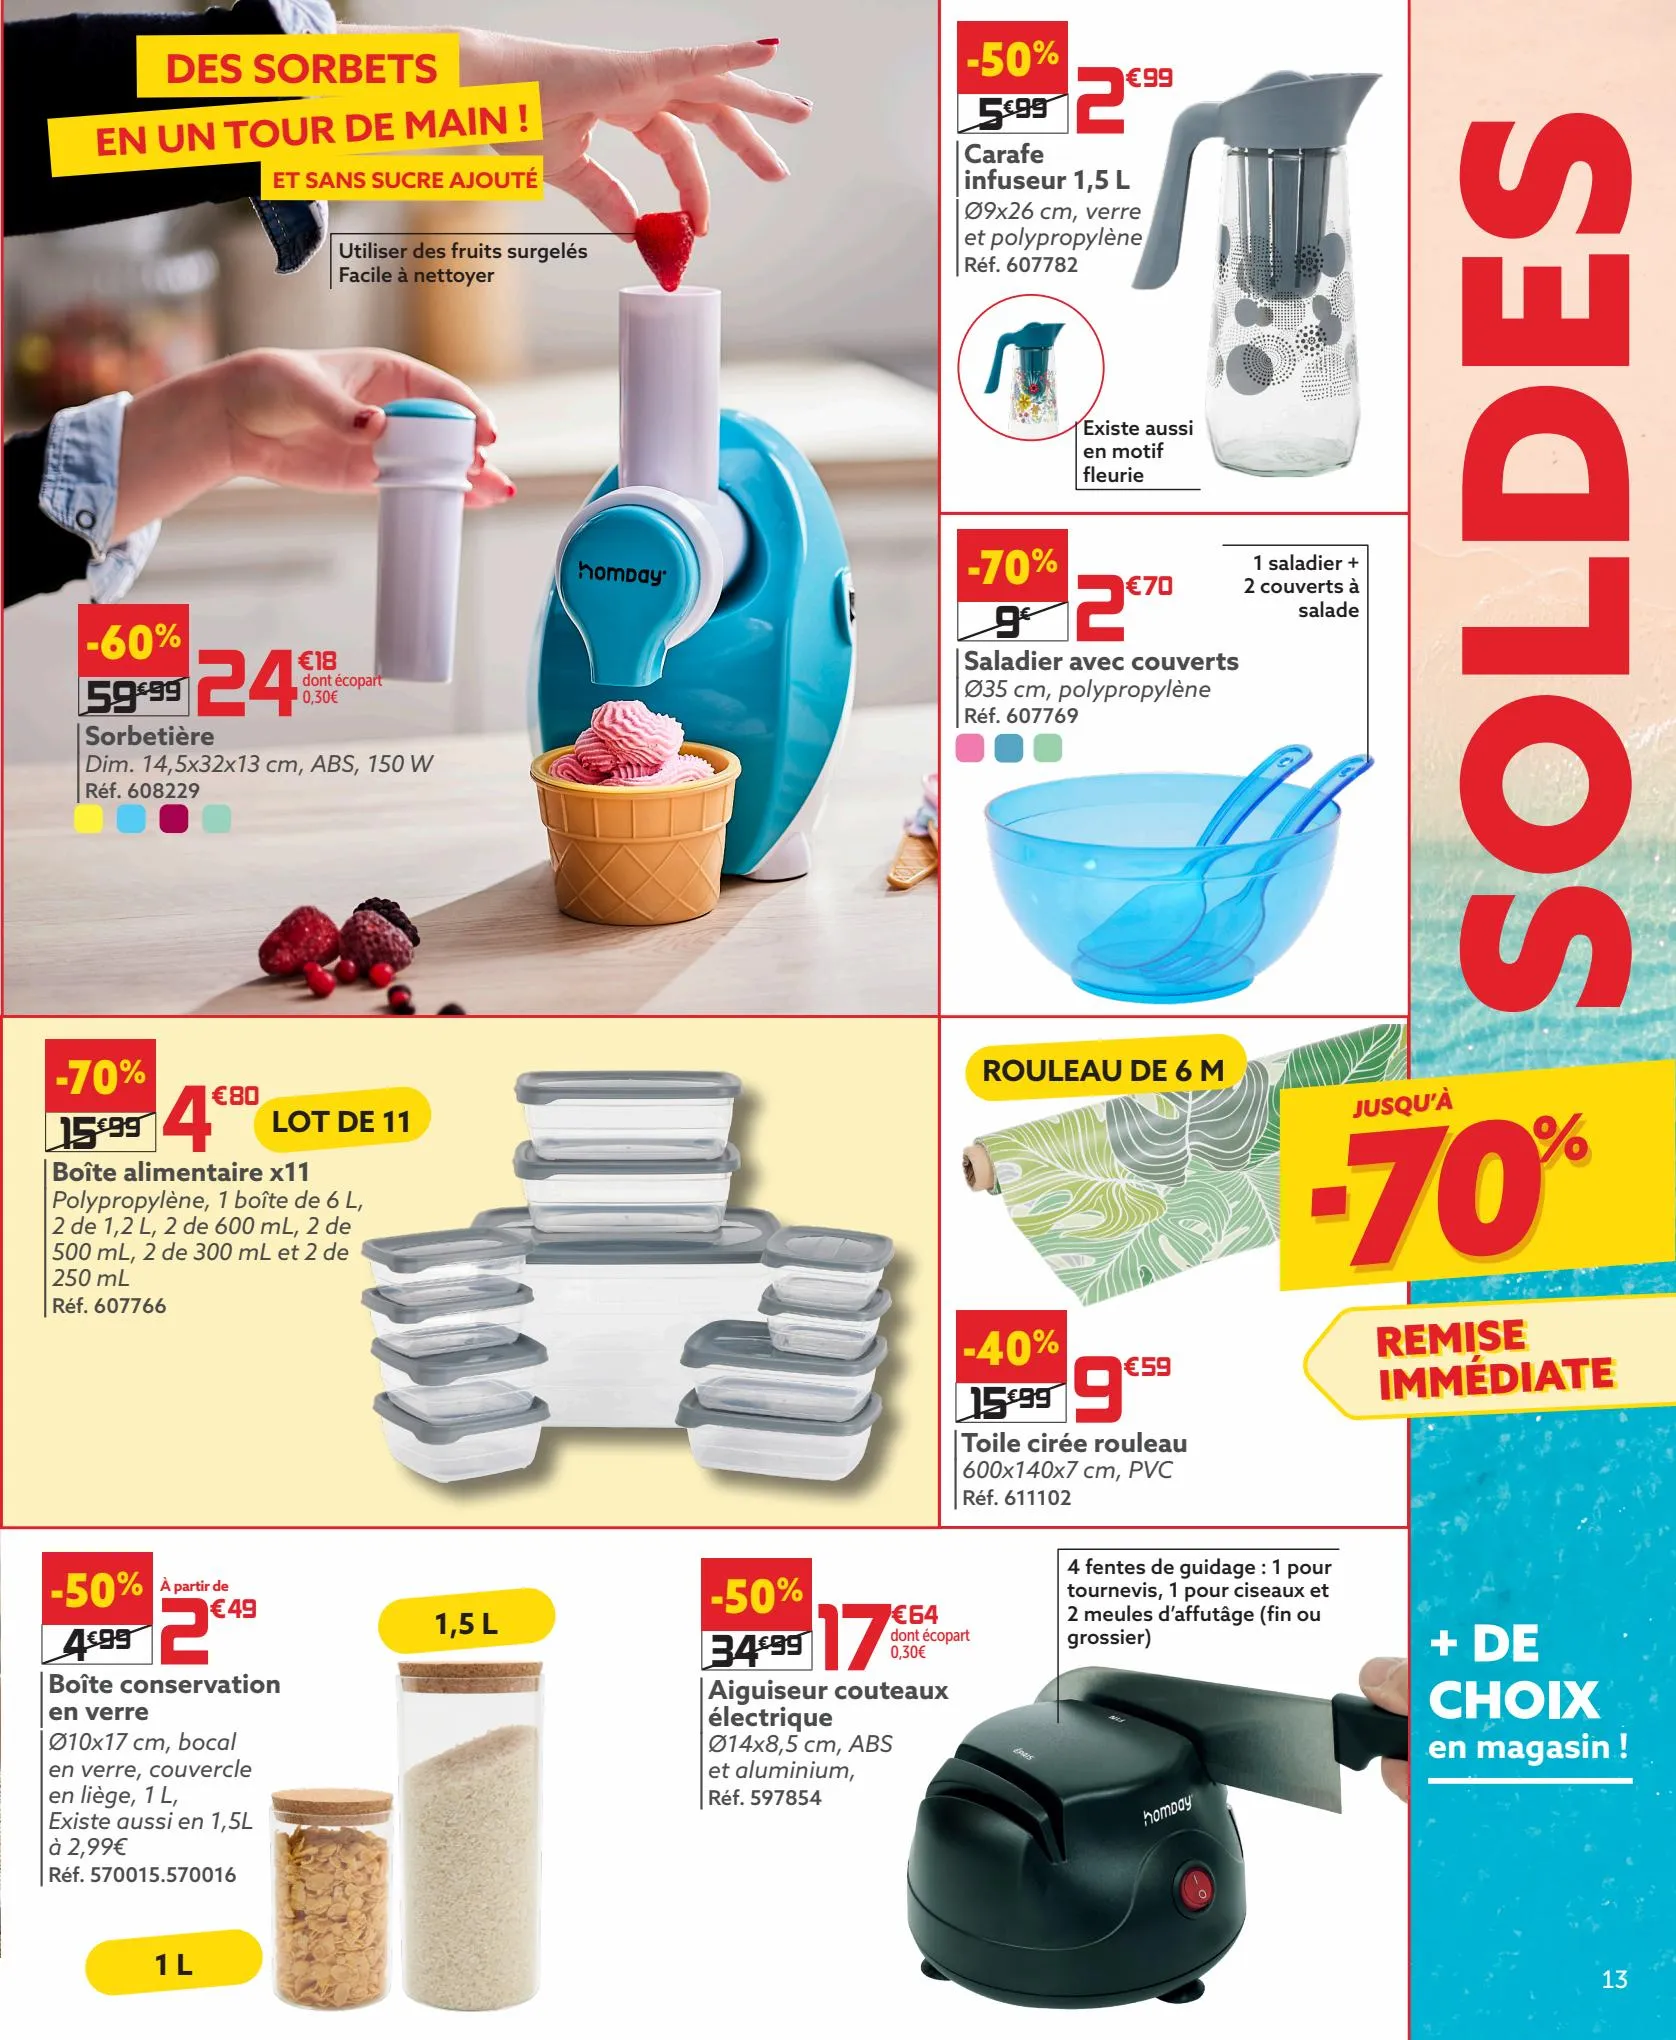 Catalogue Soldes, page 00013